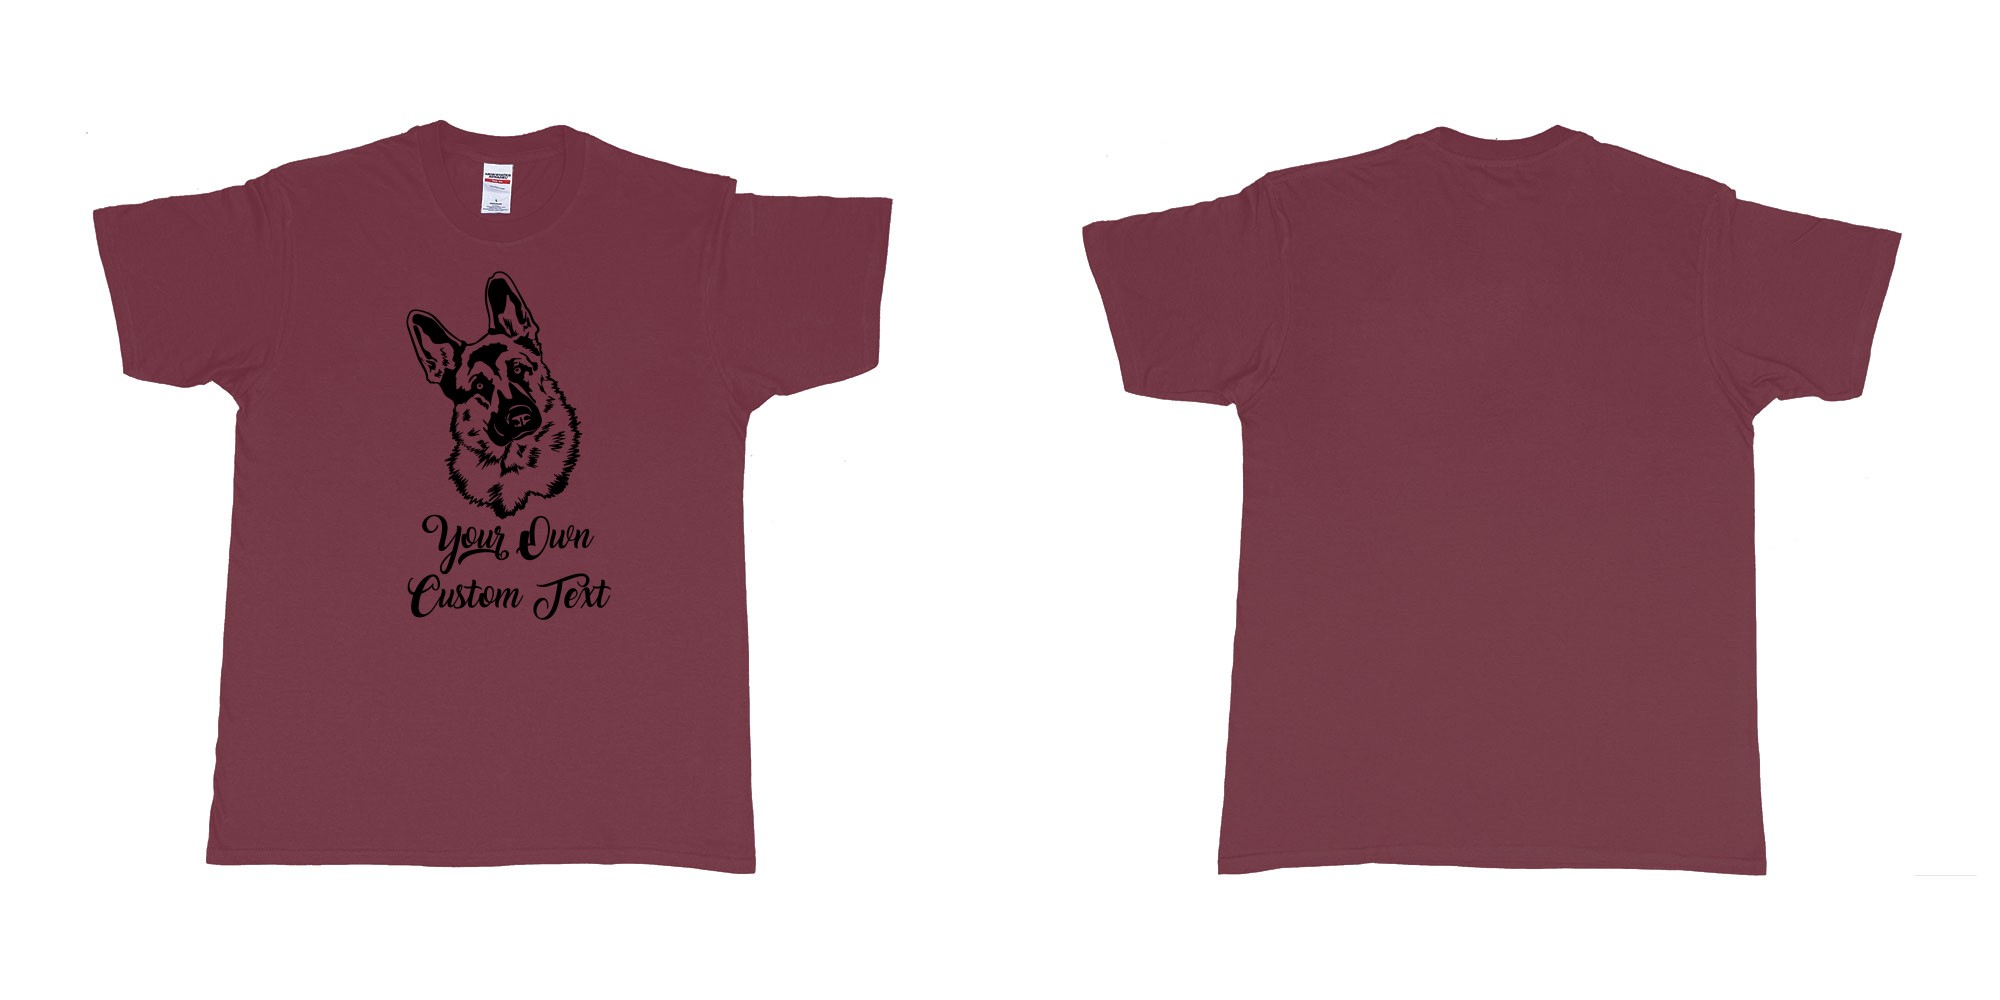 Custom tshirt design zack german shepherd tilts its head your own custom text in fabric color marron choice your own text made in Bali by The Pirate Way